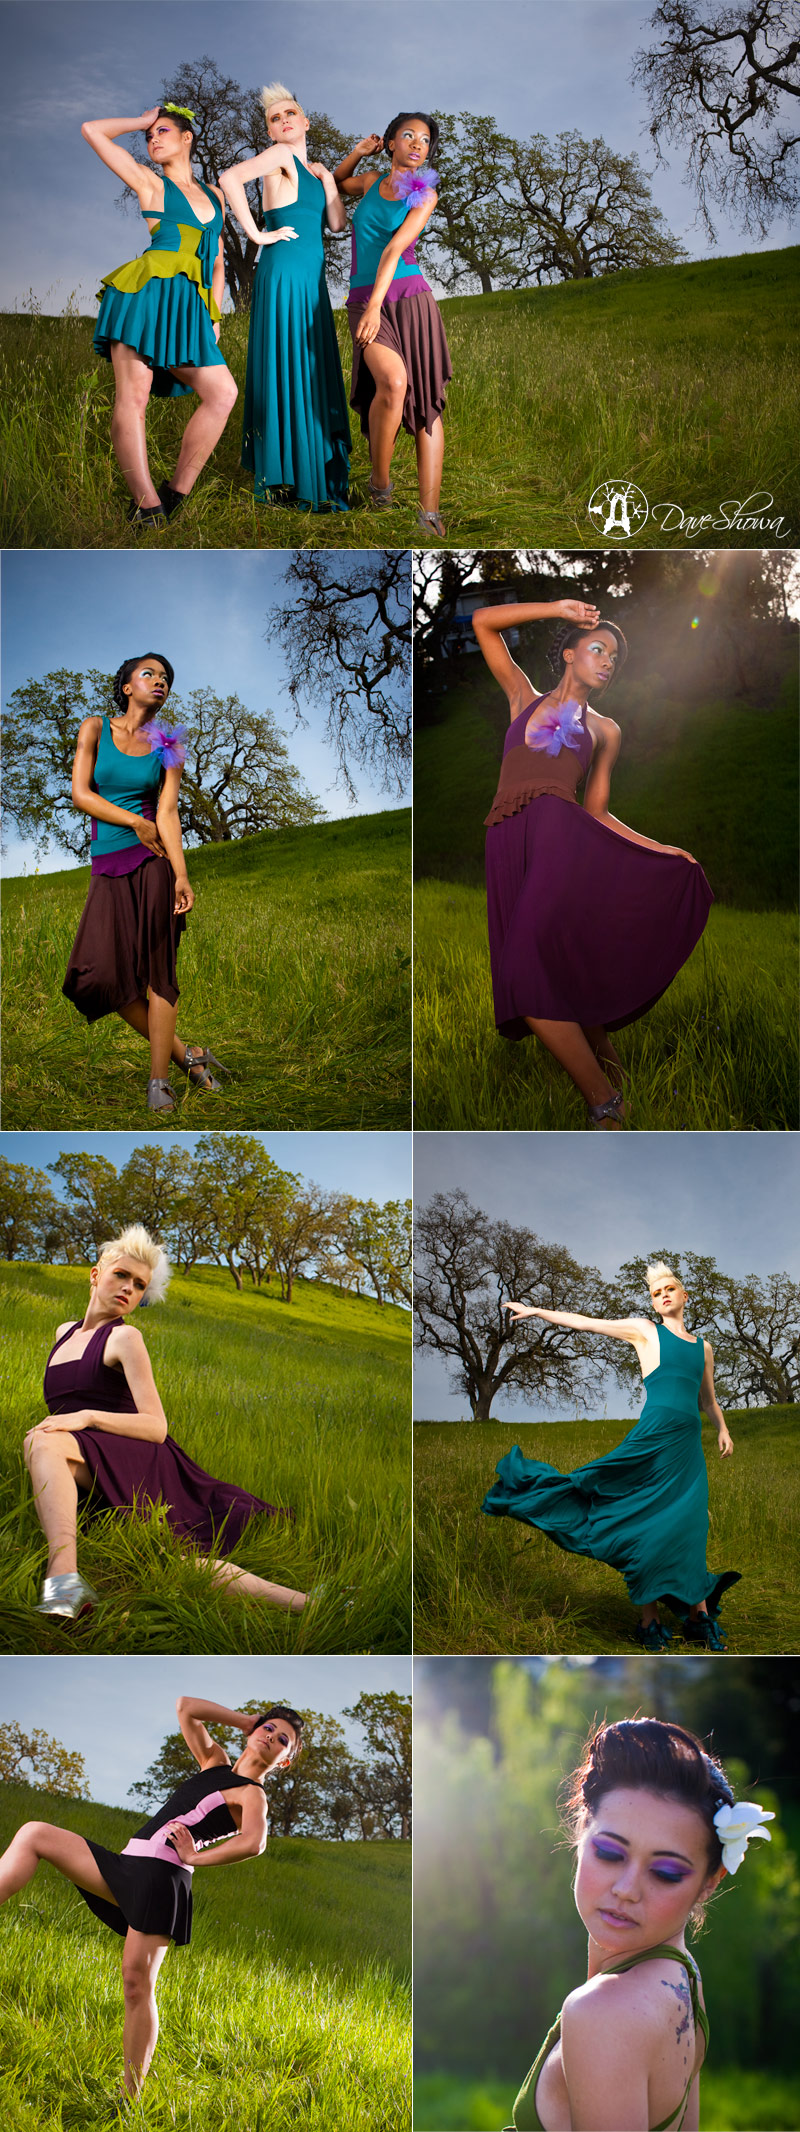 Male and Female model photo shoot of Dave Showa Photography, Becky-Chan, SS123 and Krys Alycia in San Ramon, CA, hair styled by Intertwine Hair Design, makeup by Makeup Audrey, clothing designed by DominiqueAnsari Couture